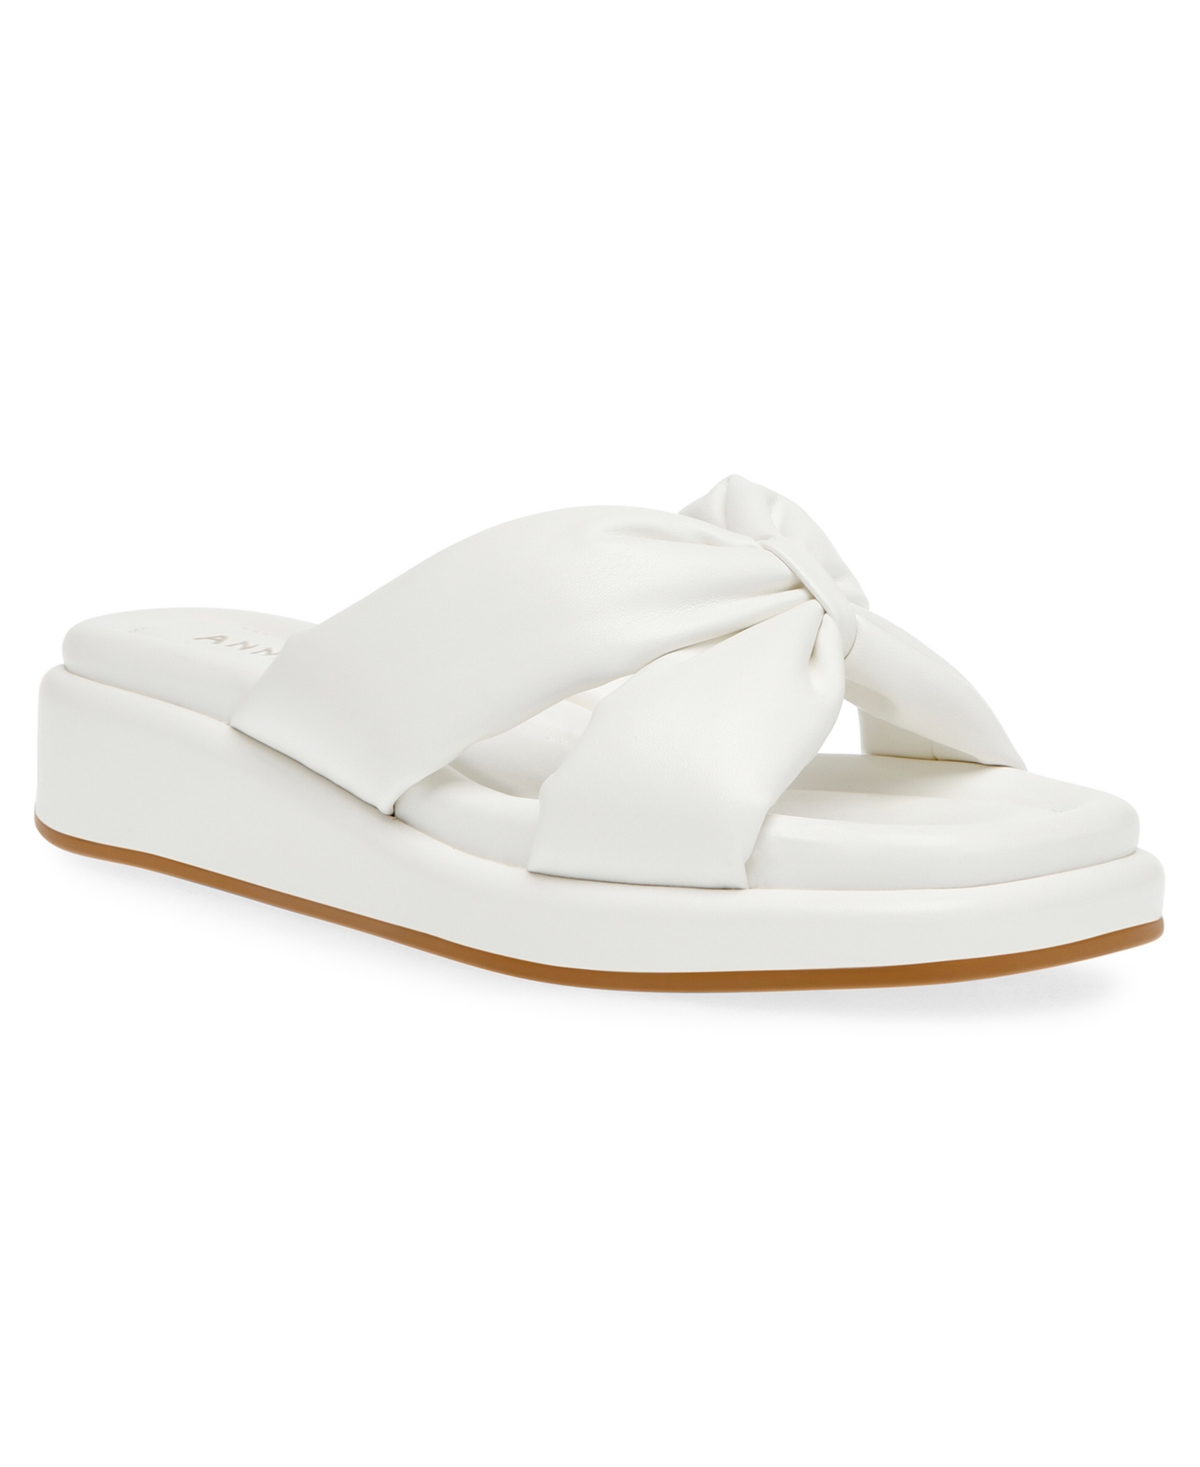 Women's Avenue Sandals - White Smooth